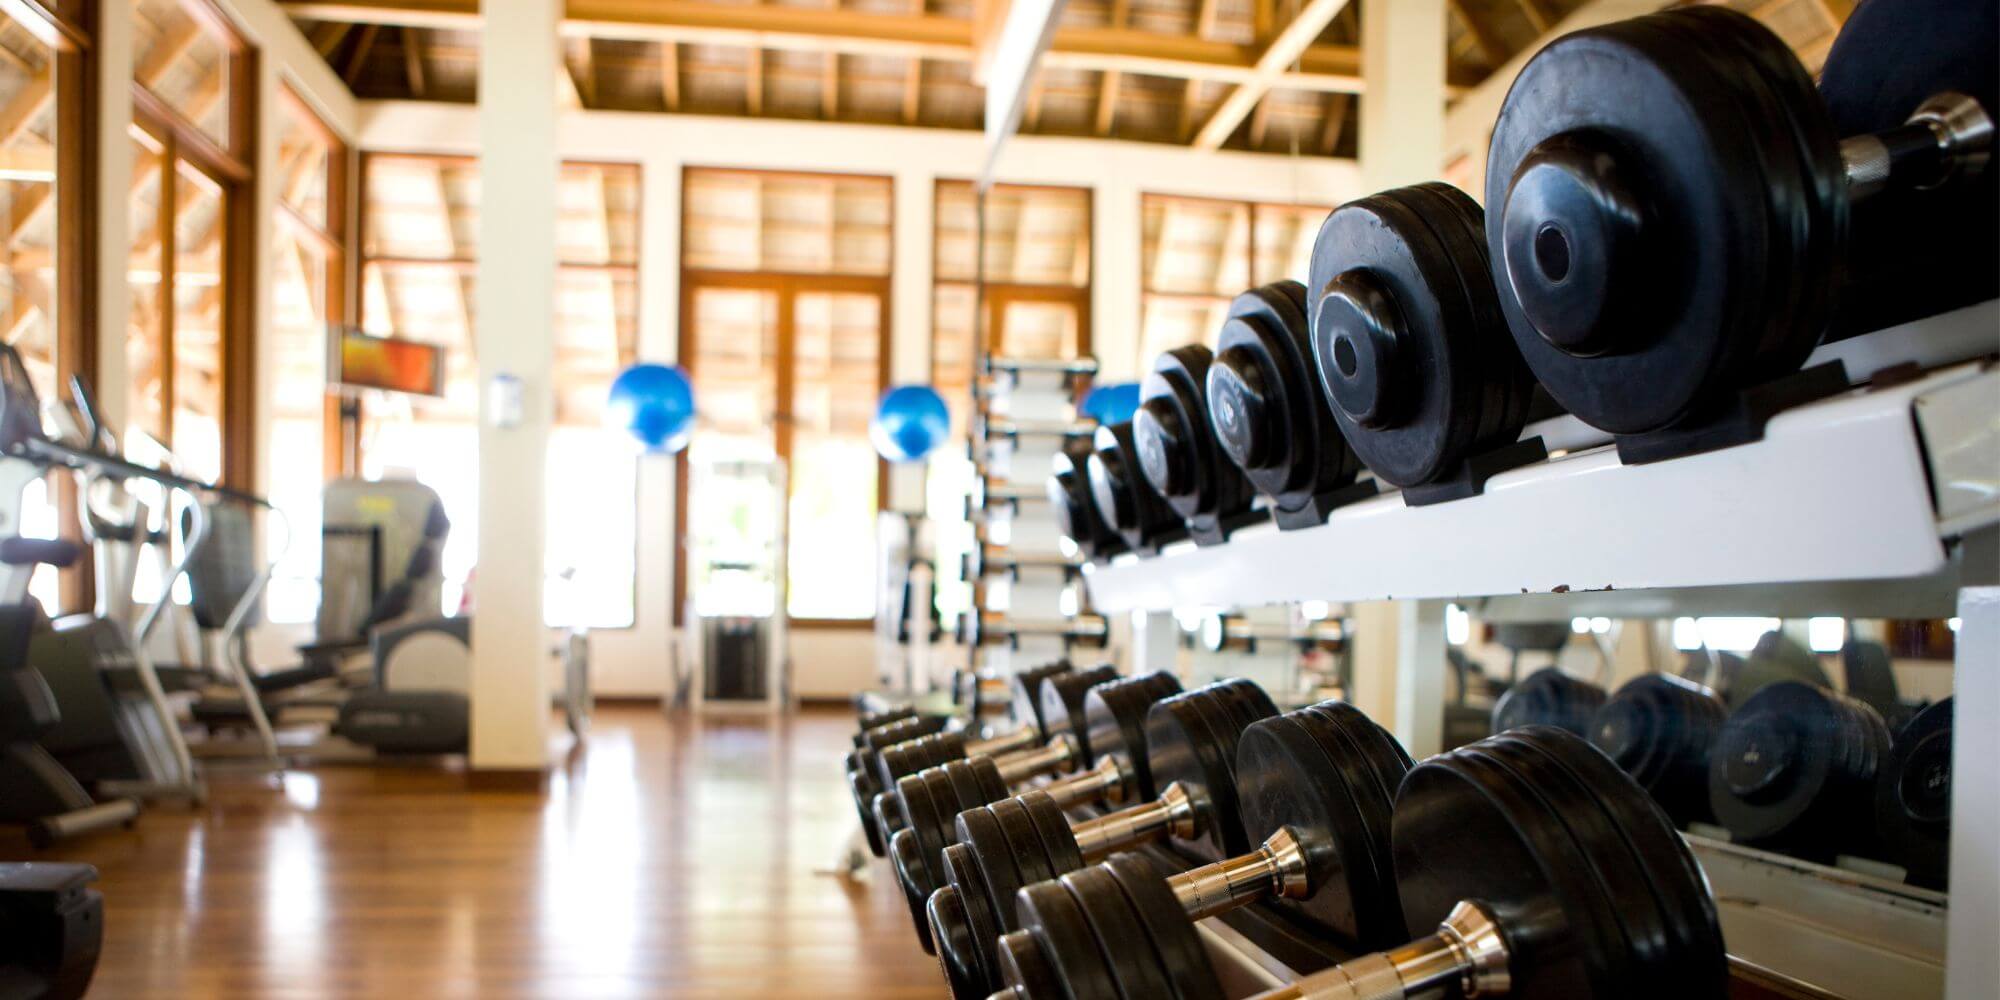 A gym with large dumbbells on a rack in the foreground and machines in the background